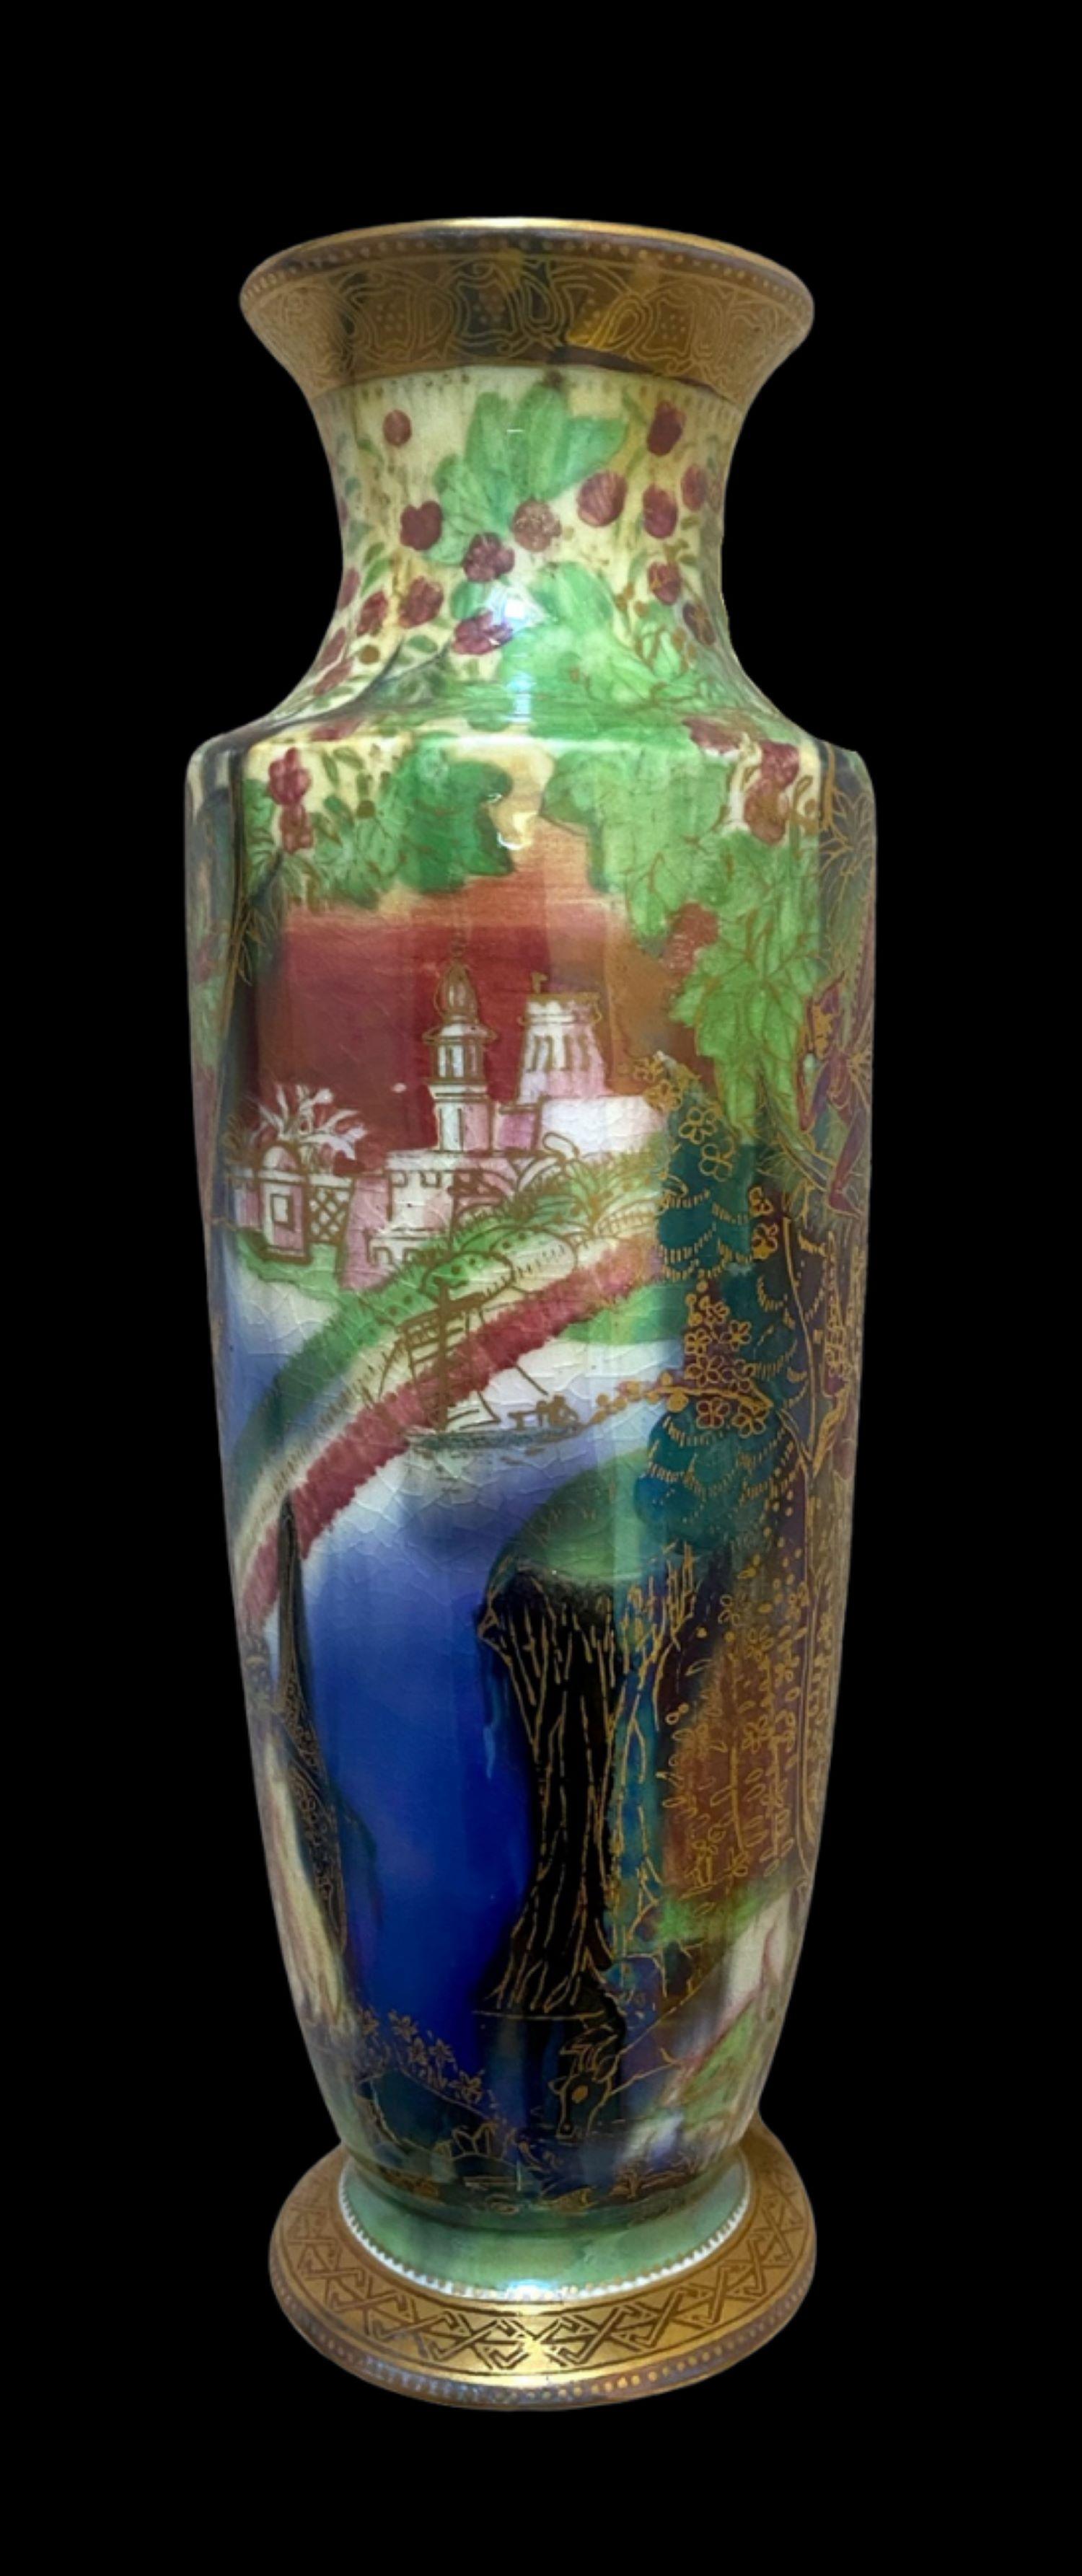 5146

Wedgwood Fairyland Lustre Vase decorated in the scarce Bifrost design by Daisy Makeig Jones

21.5cm high

Circa 1920